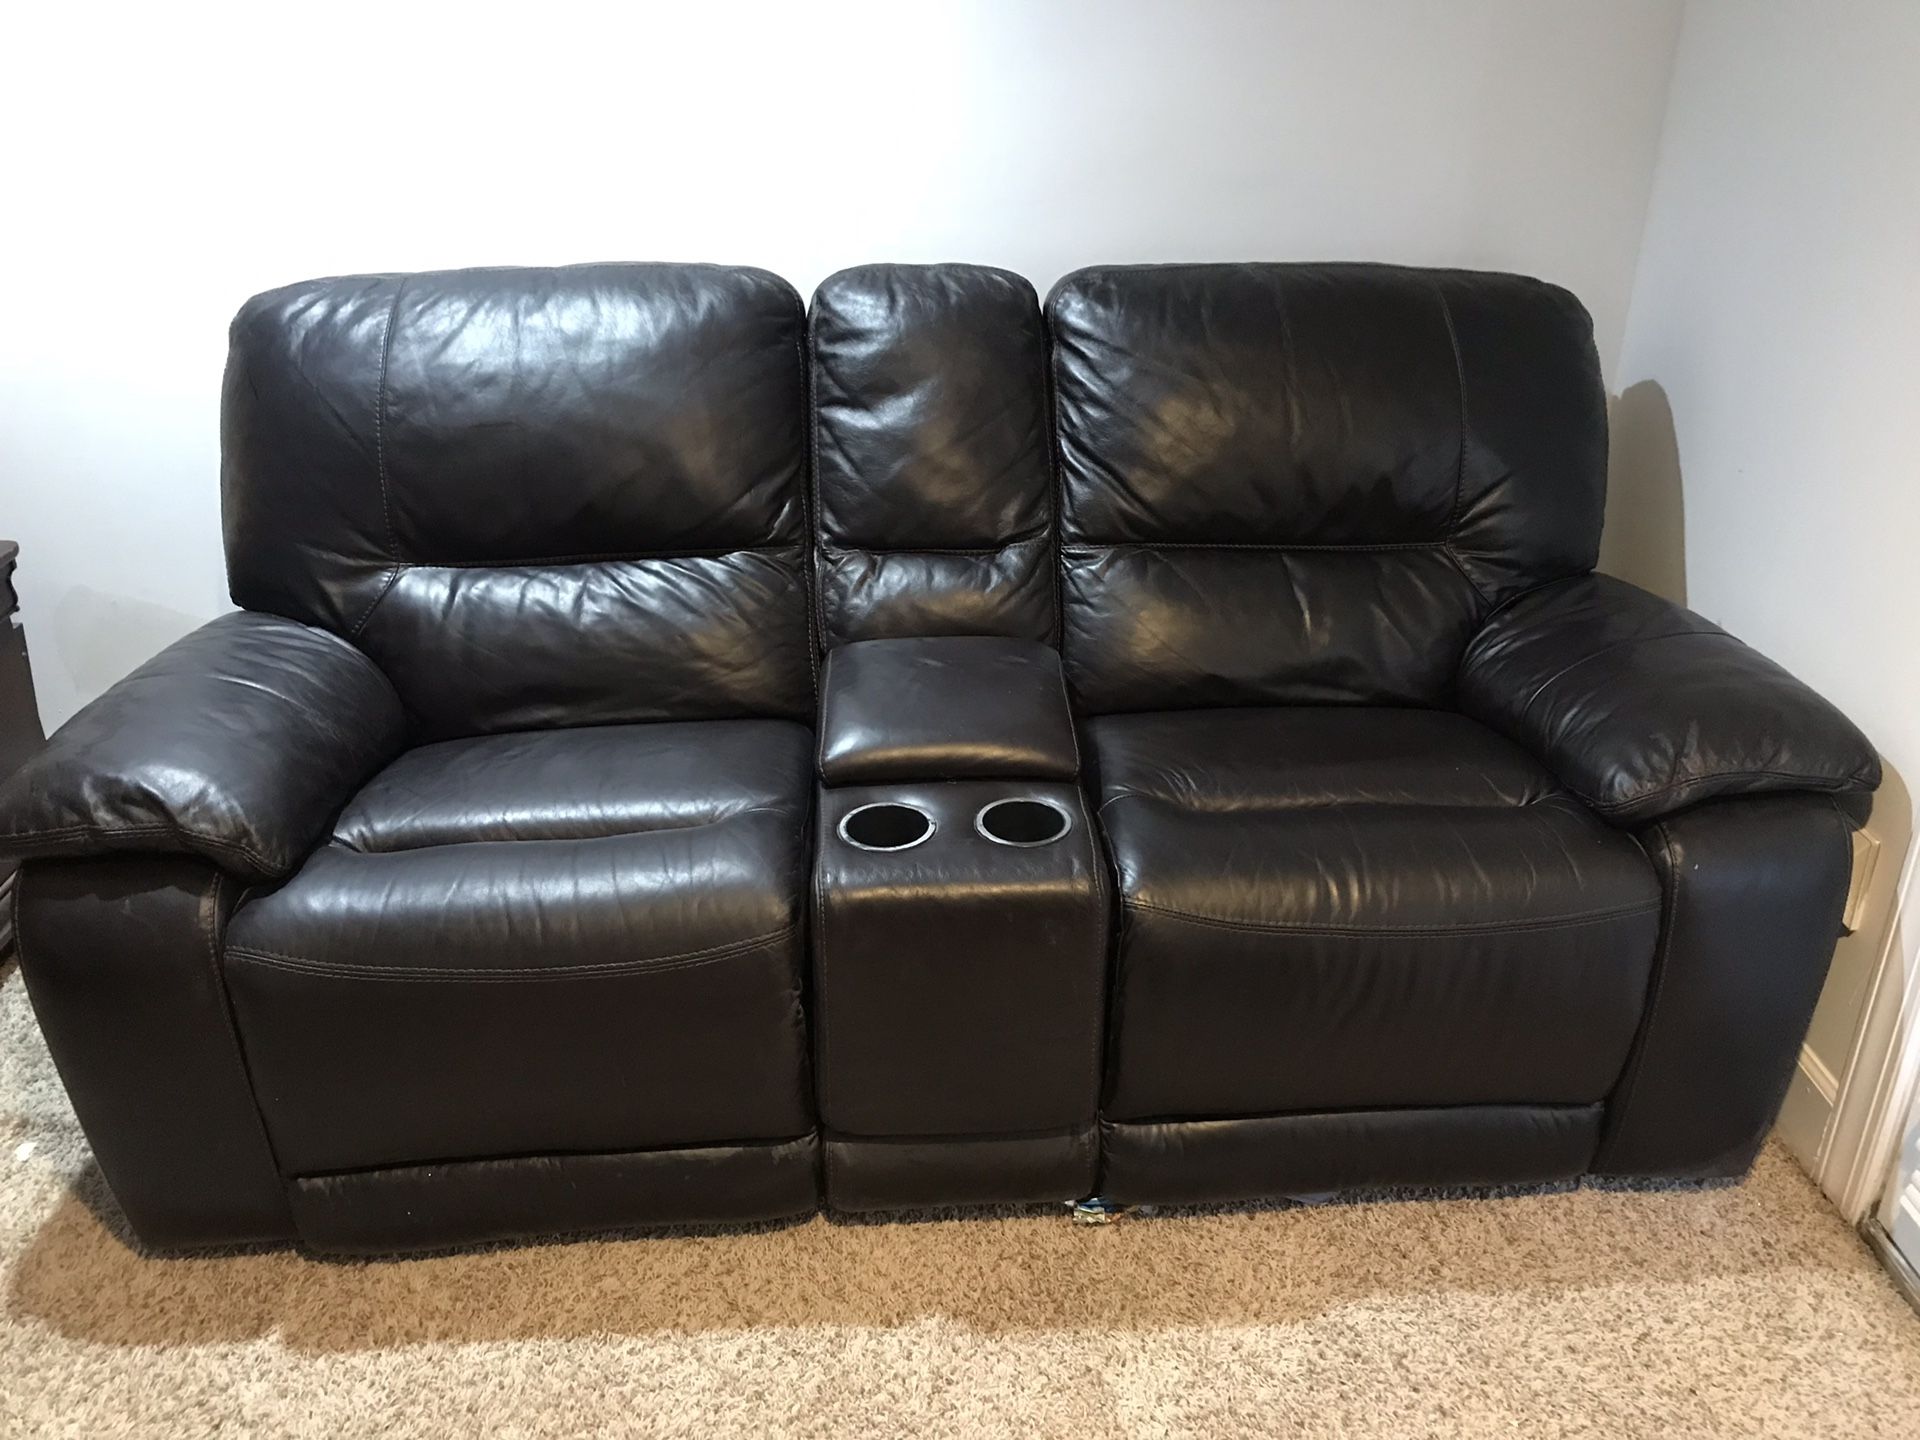 Double reclining and rocking sofa in excellent condition!